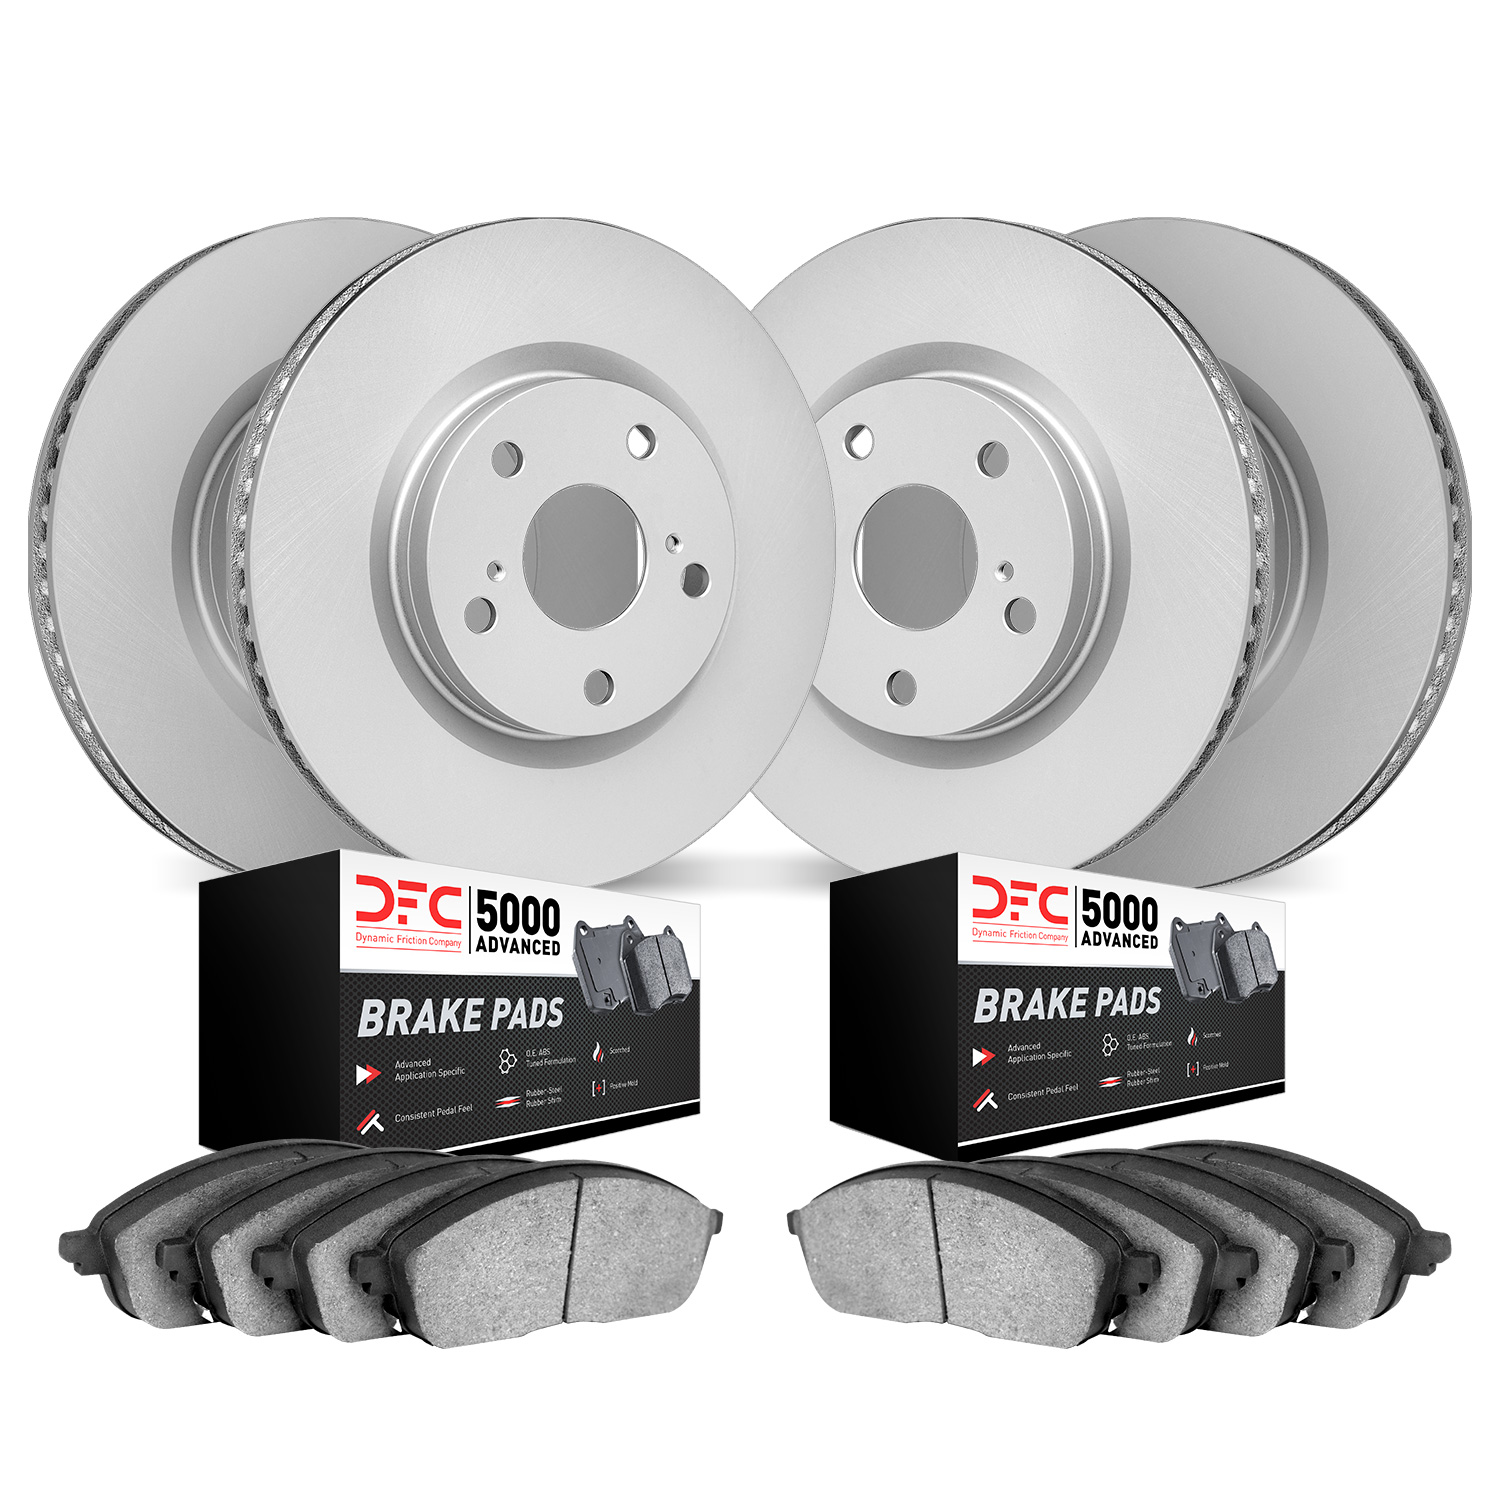 4504-63076 Geospec Brake Rotors w/5000 Advanced Brake Pads Kit, 2009-2015 Mercedes-Benz, Position: Front and Rear